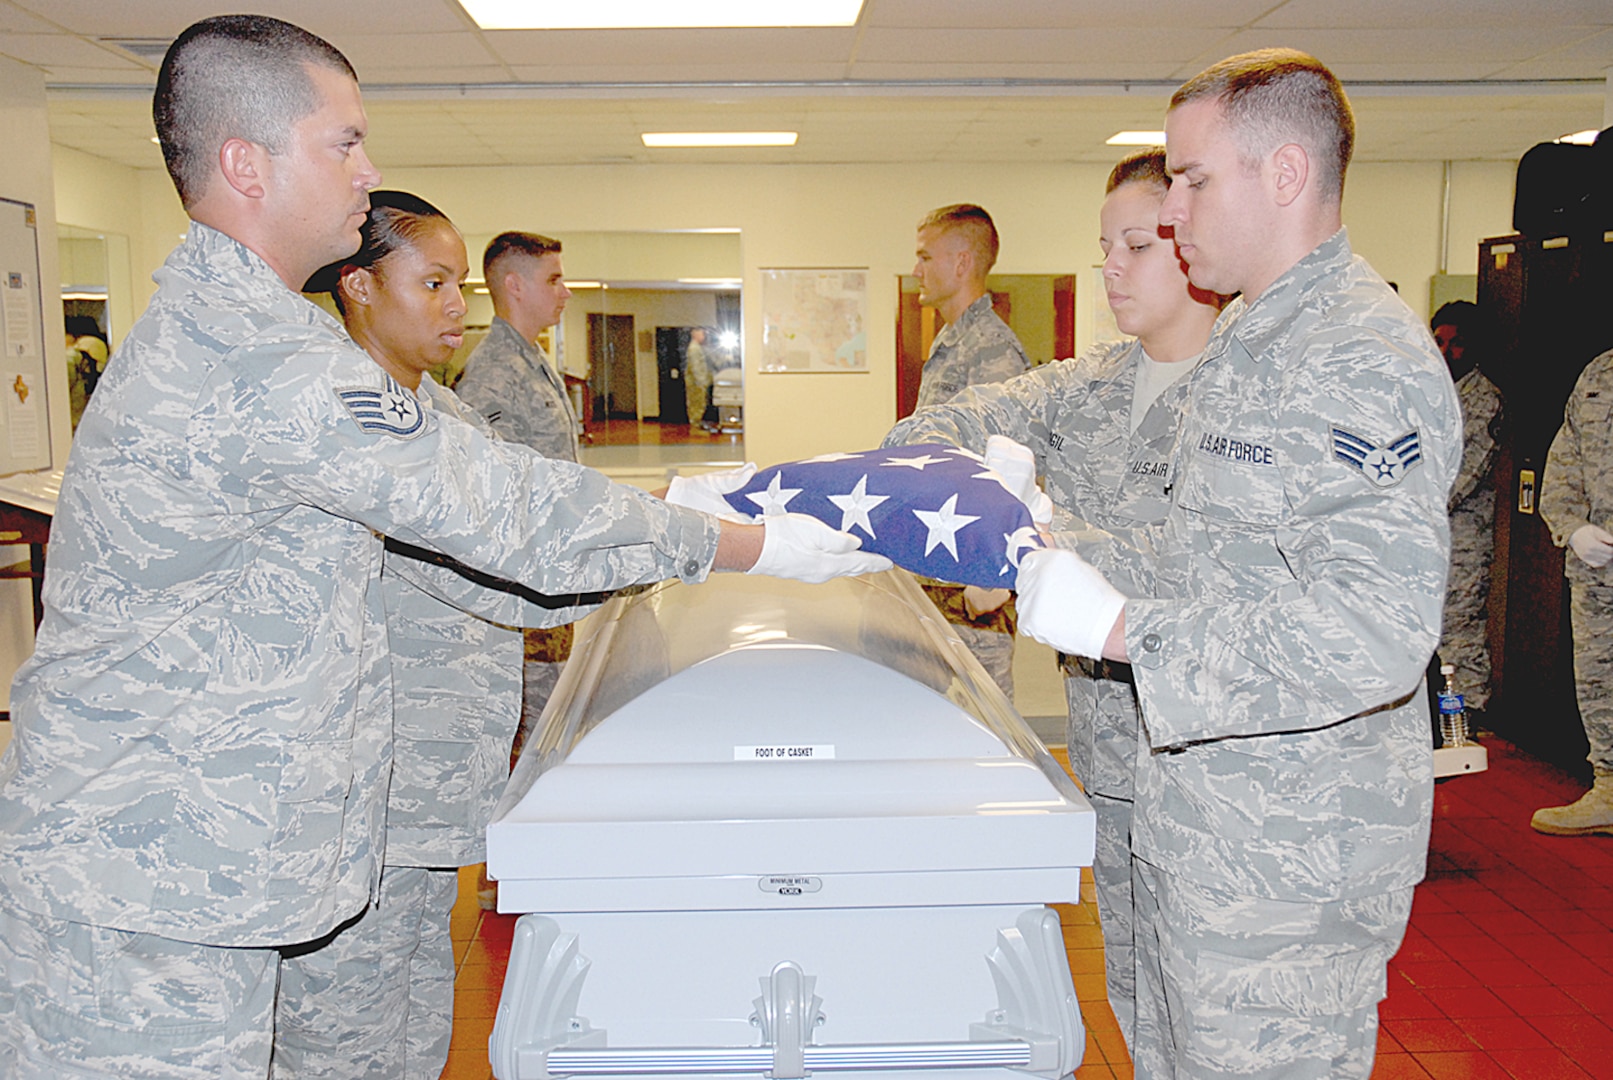 Members of the 12th Force Support Squadron ceremonial guard staff (from left to right), Staff Sgt. Michael Whitman, Staff Sgt. Ronetta Jones, Airman 1st Class Kyle Hicks, Senior Airman Bradley Blair, Senior Airman Patricia Vigil and Senior Airman James Lacey practice folding the American flag over a casket.